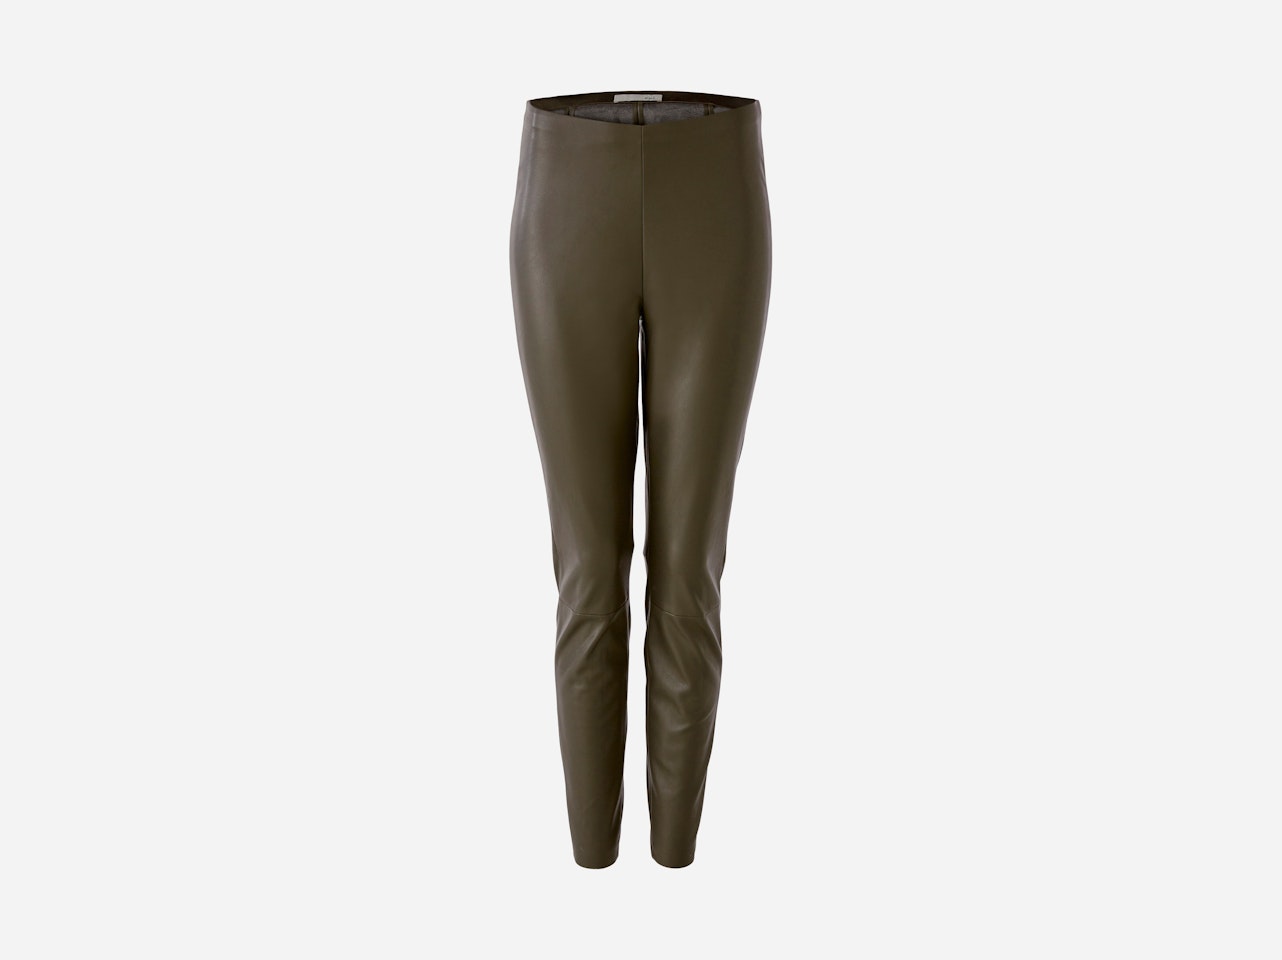 CHASEY CHASEY Leggings made from imitation leather